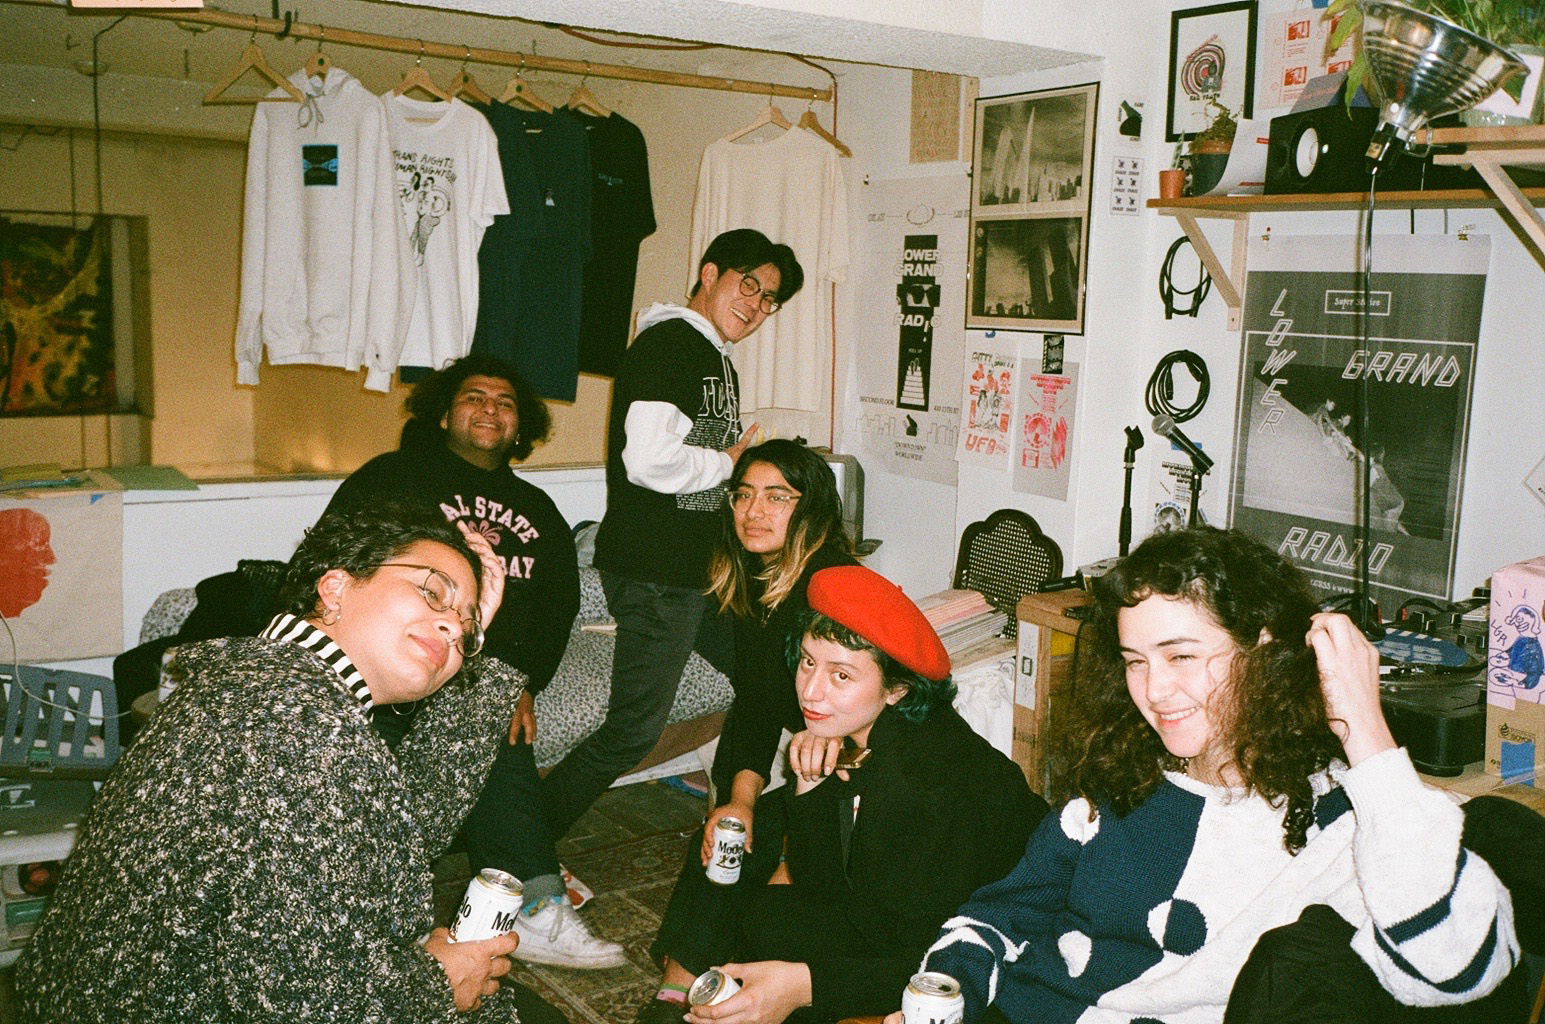 A group of people hanging out in a casual room with posters on the wall and a record player in the corner.